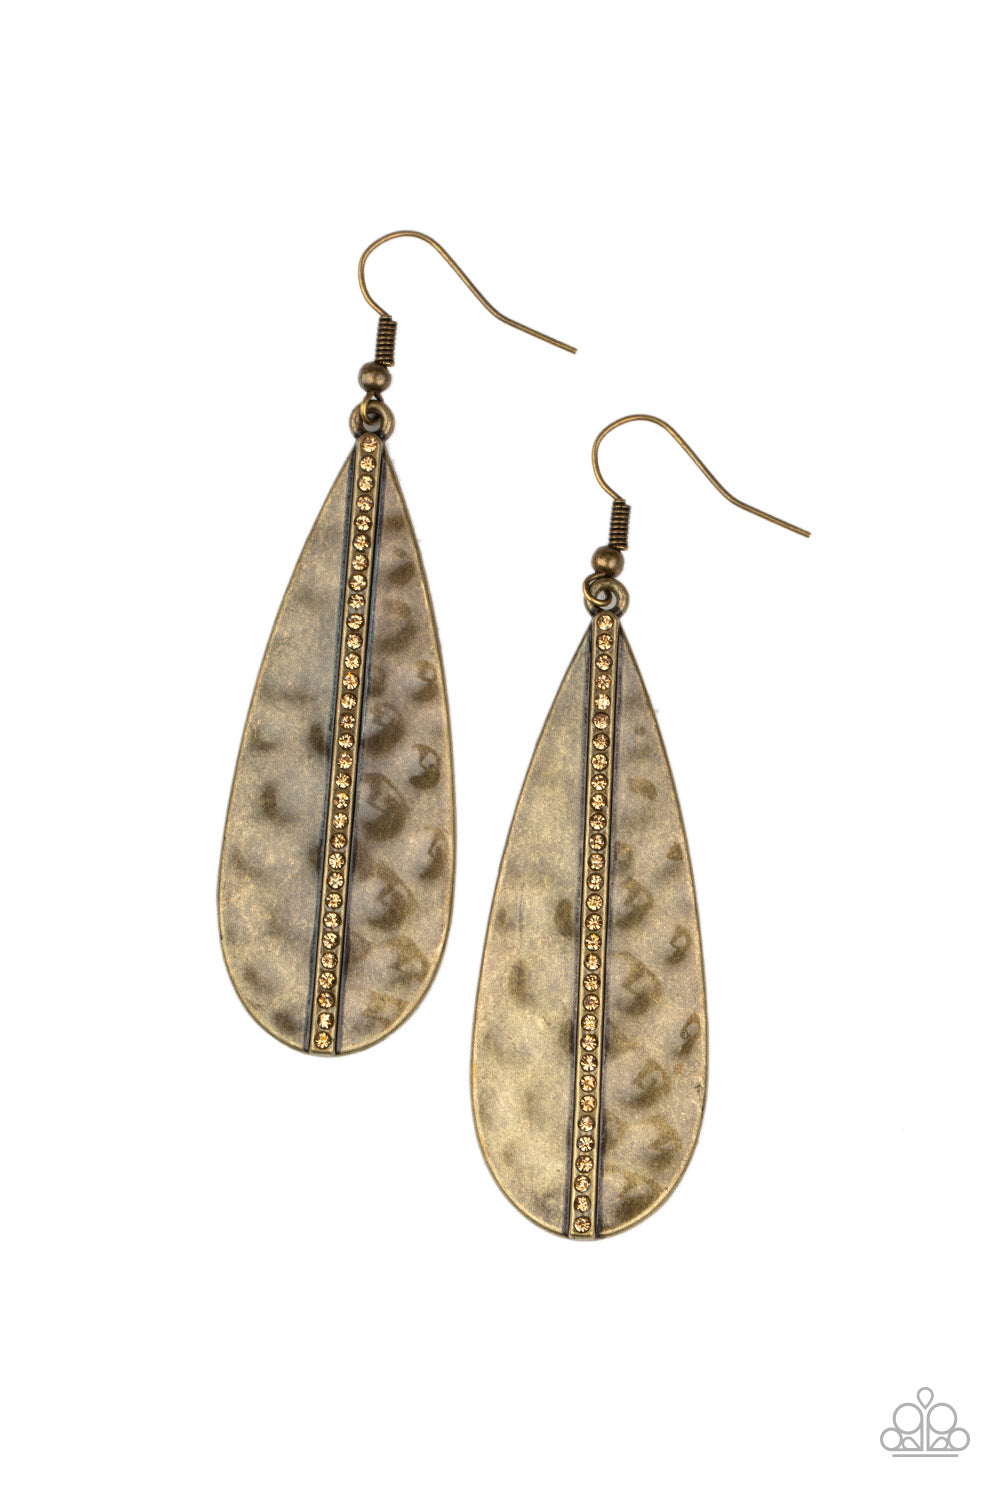 On The Up and UPSCALE Brass-Earrings